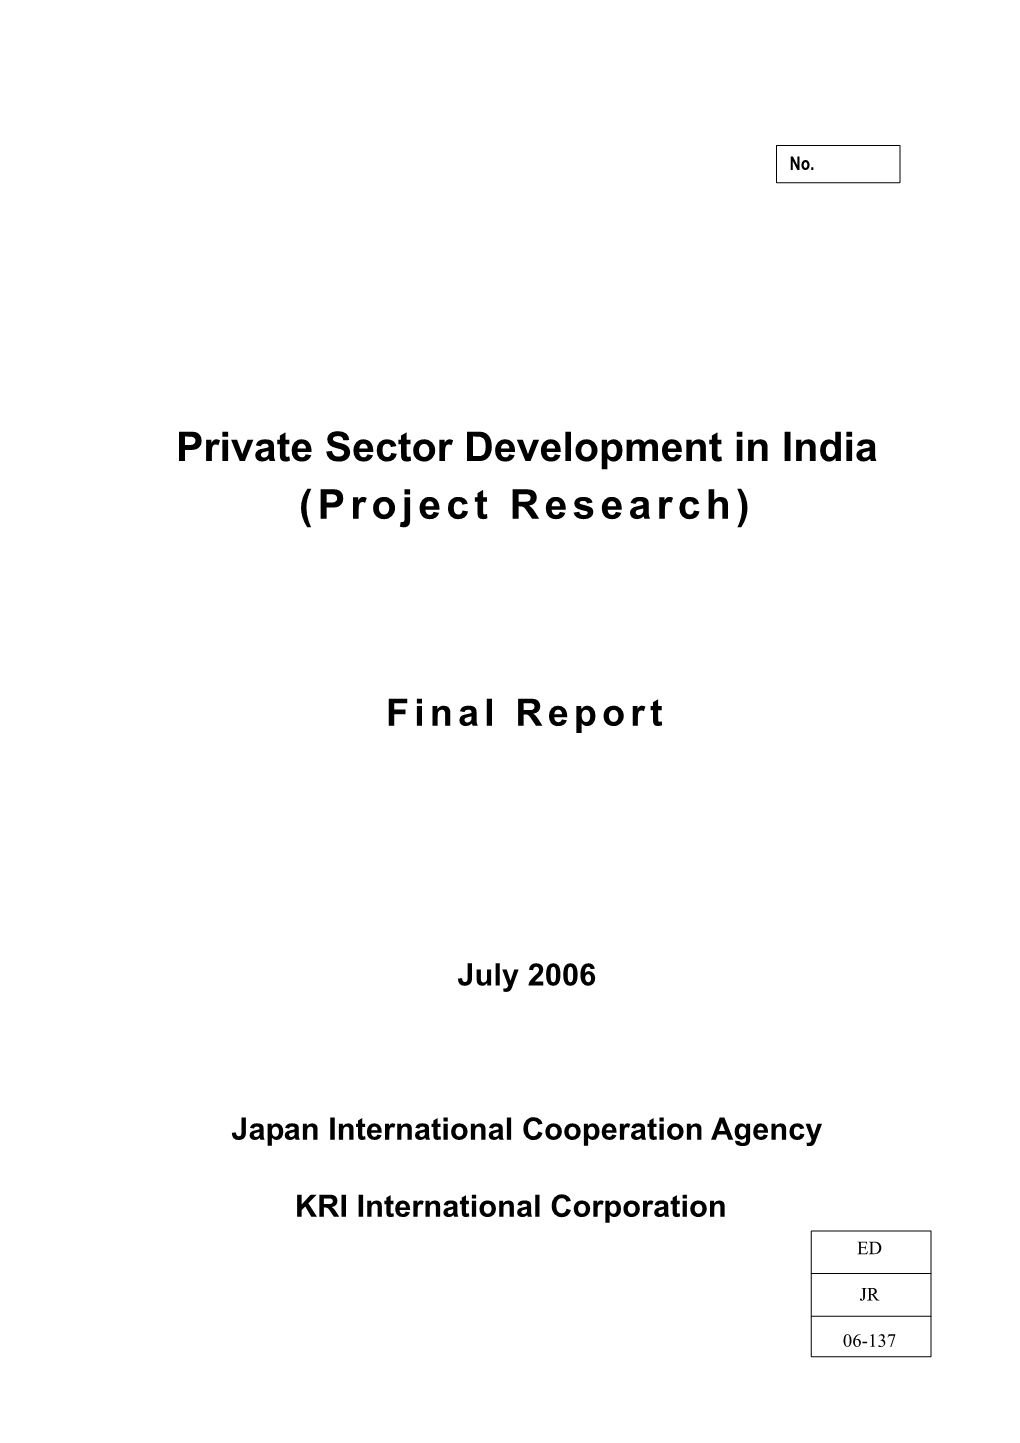 Private Sector Development in India (Project Research)